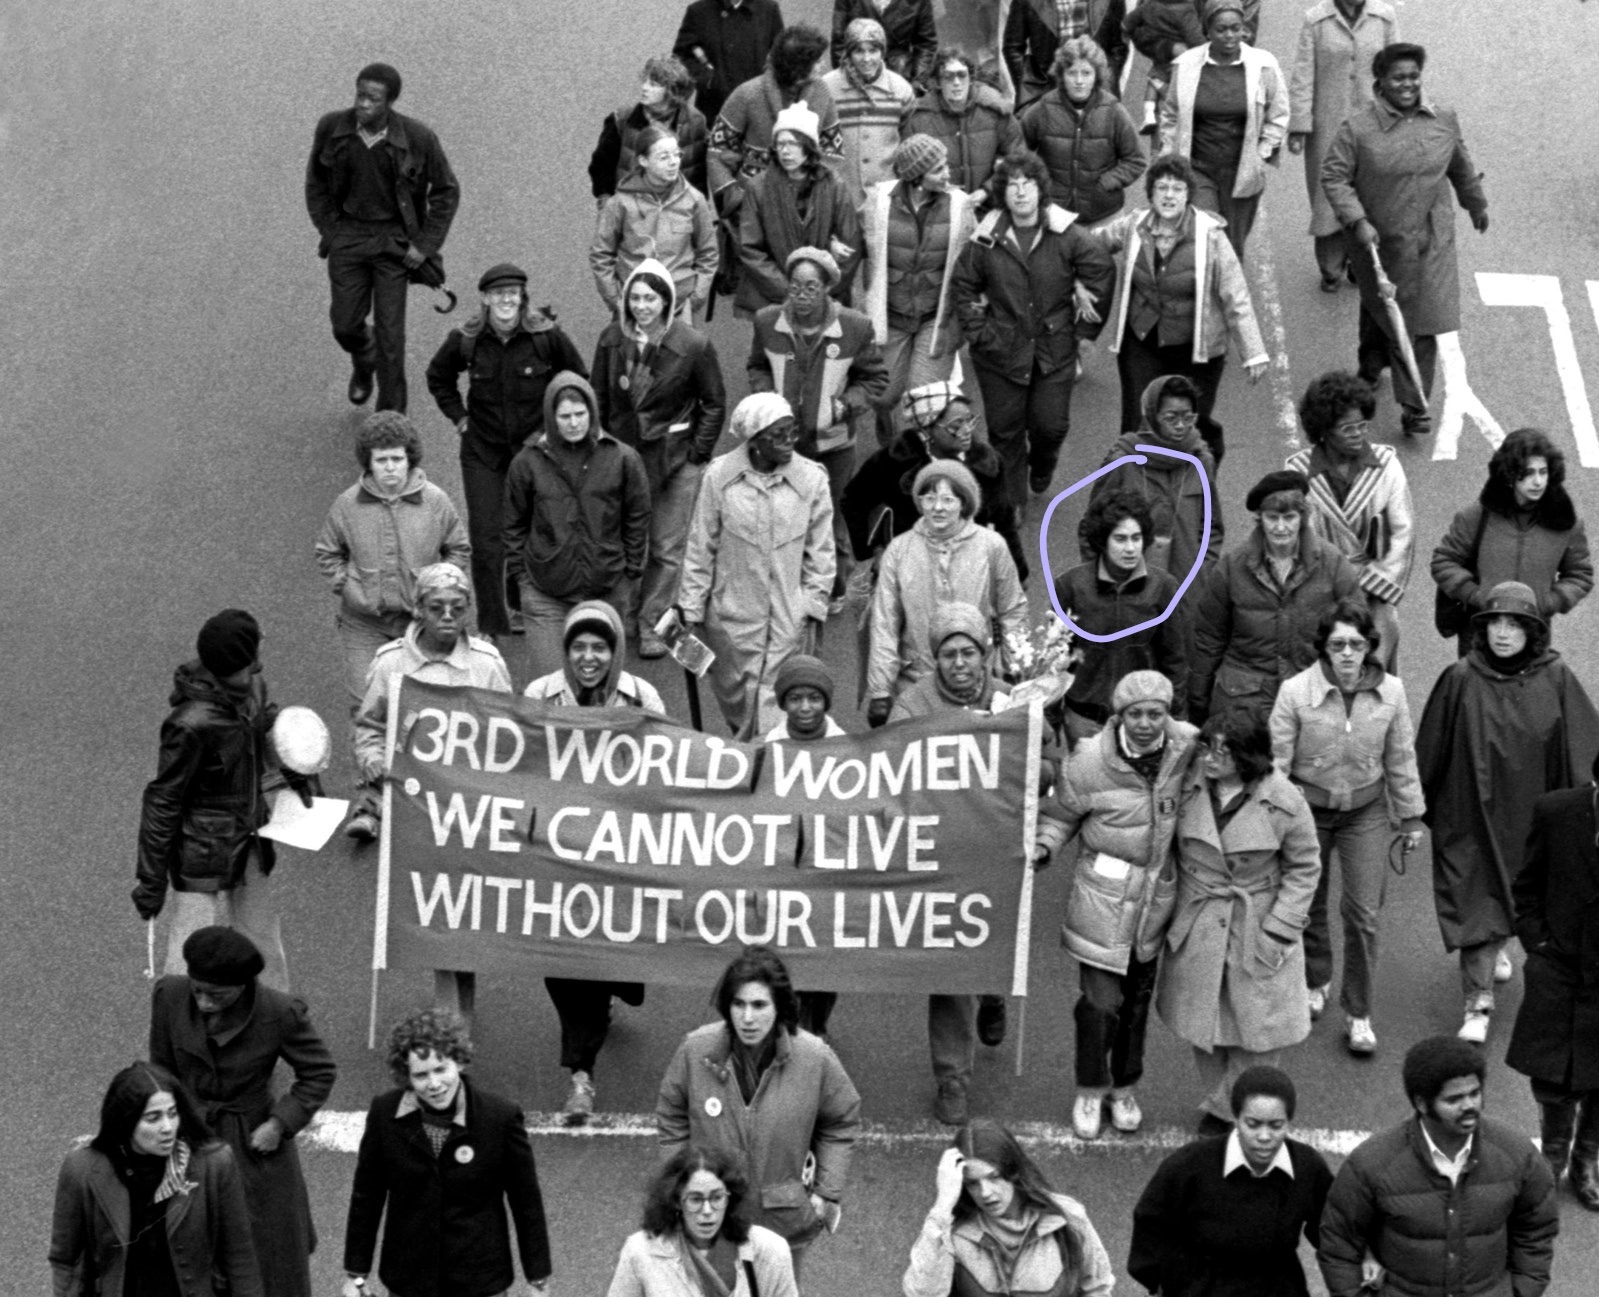 Cheryl Qamar marching with the Combahee River Collective to memorialize the deaths of Black women who had been murdered in the Boston area, 1979. Their banner reads, “3rd World Women: We Cannot Live Without Our Lives.” Photo Credit: the Combahee River Collective Archives. Photo courtesy of Cheryl Qamar.